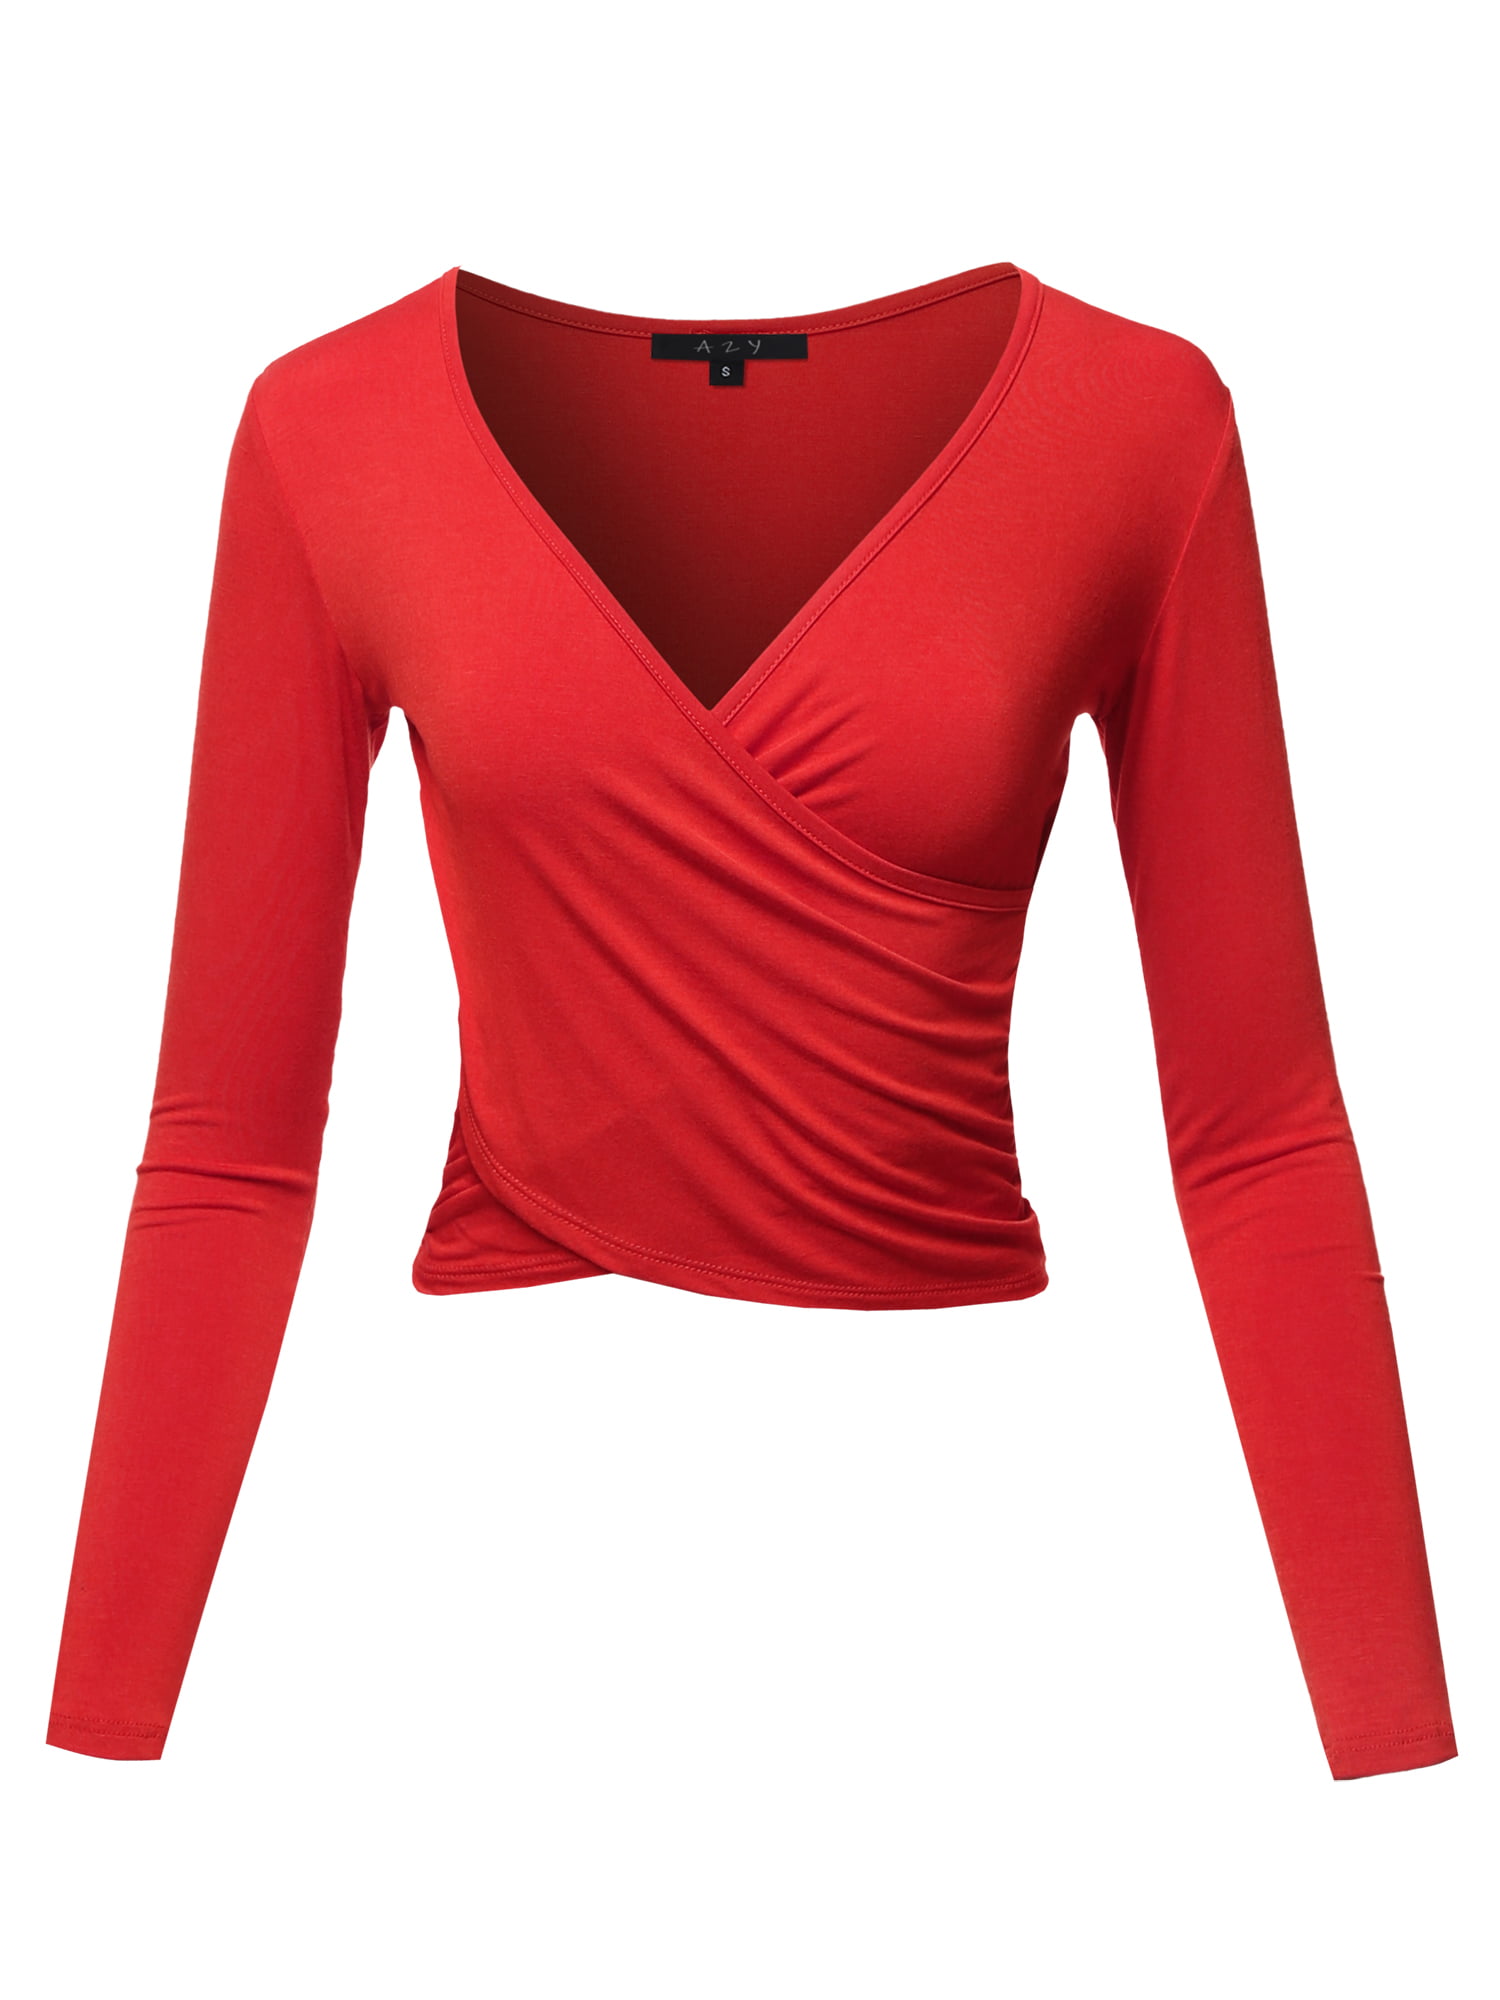 A2Y Women's Long Sleeve Deep V Neck Cross Wrap Crop Top T Shirts Red M